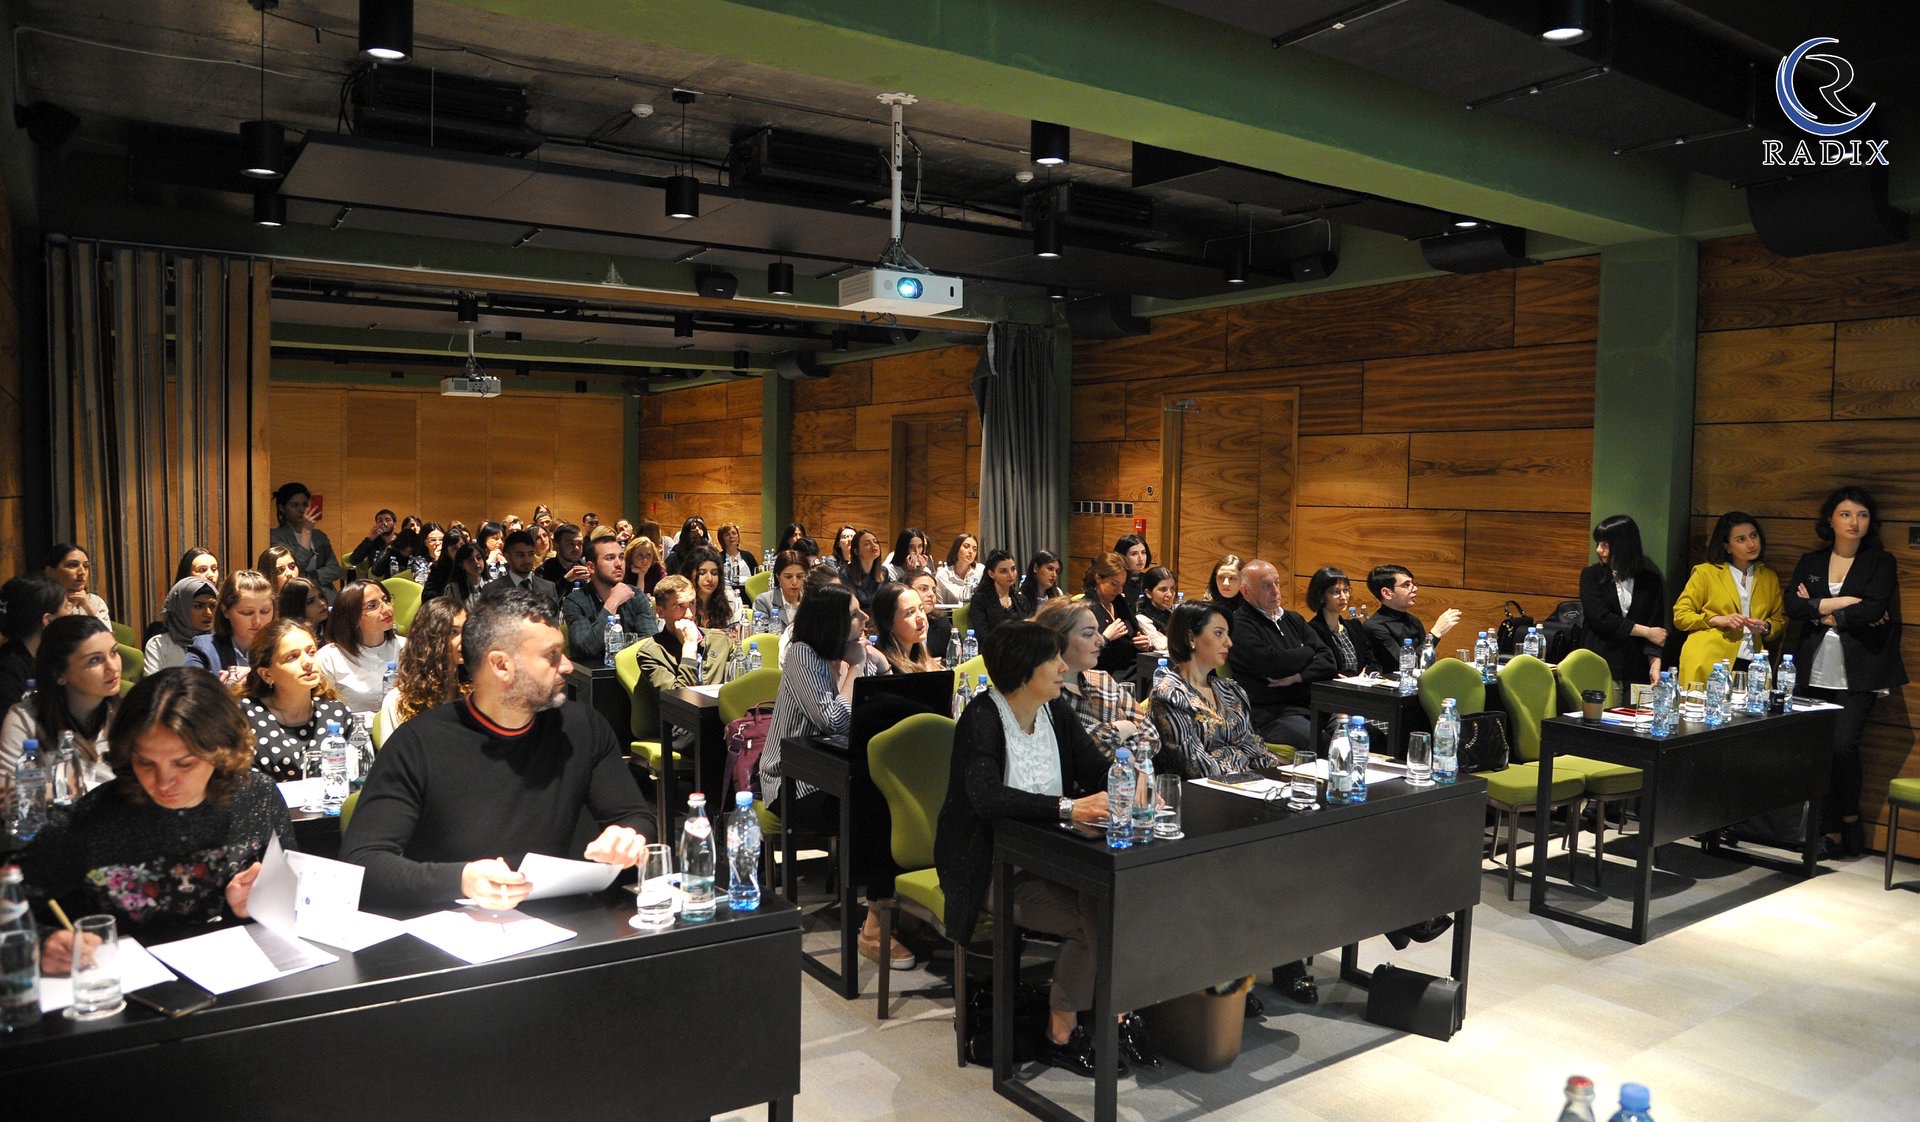 Conference of students and residents organized within the Dental Congress